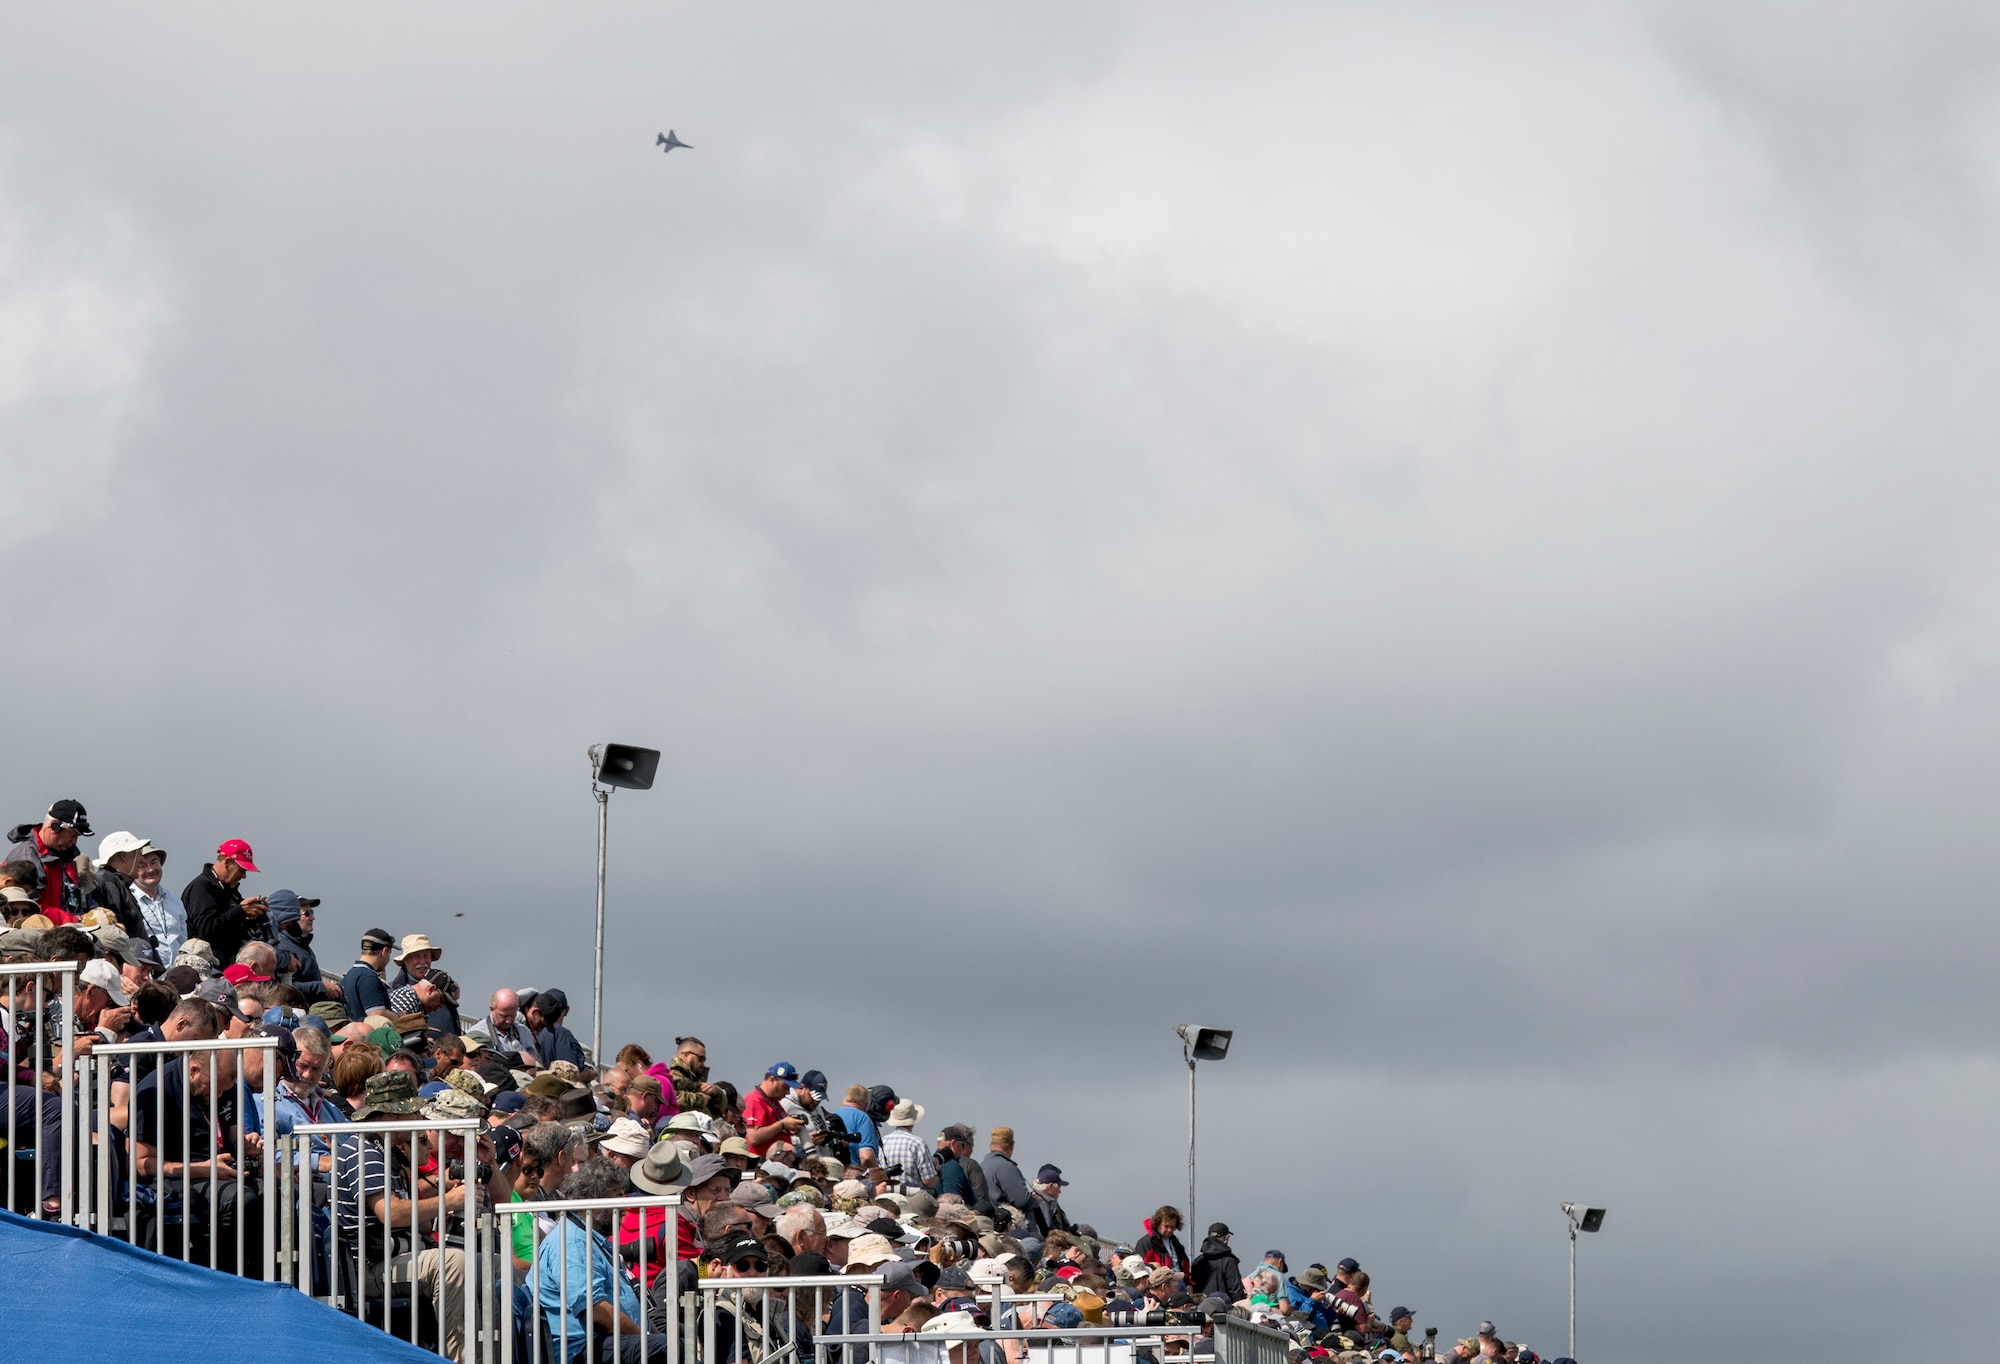 Thousands of attendees watch the aerial demonstrations during the 2019 Royal International Air Tattoo at RAF Fairford, England, July 20, 2019. This year’s RIAT commemorated the 70th Anniversary of NATO and highlighted the United State’s enduring commitment to its European allies. (U.S. Air Force photo by Airman 1st Class Jennifer Zima)